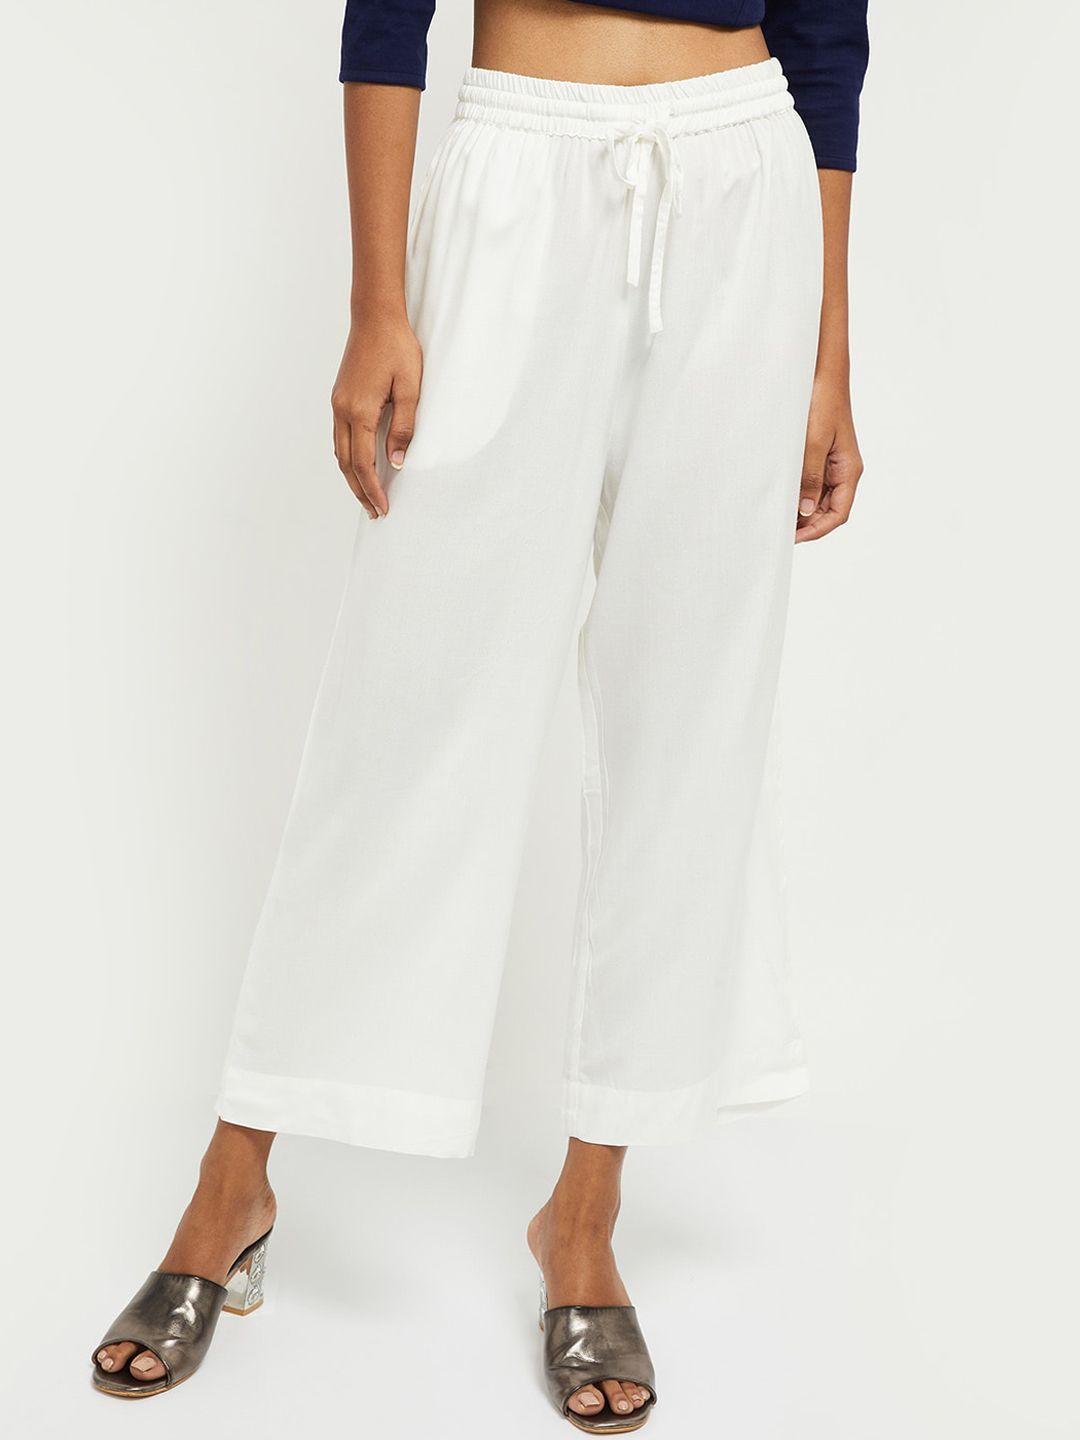 max-women-off-white-culottes-trousers